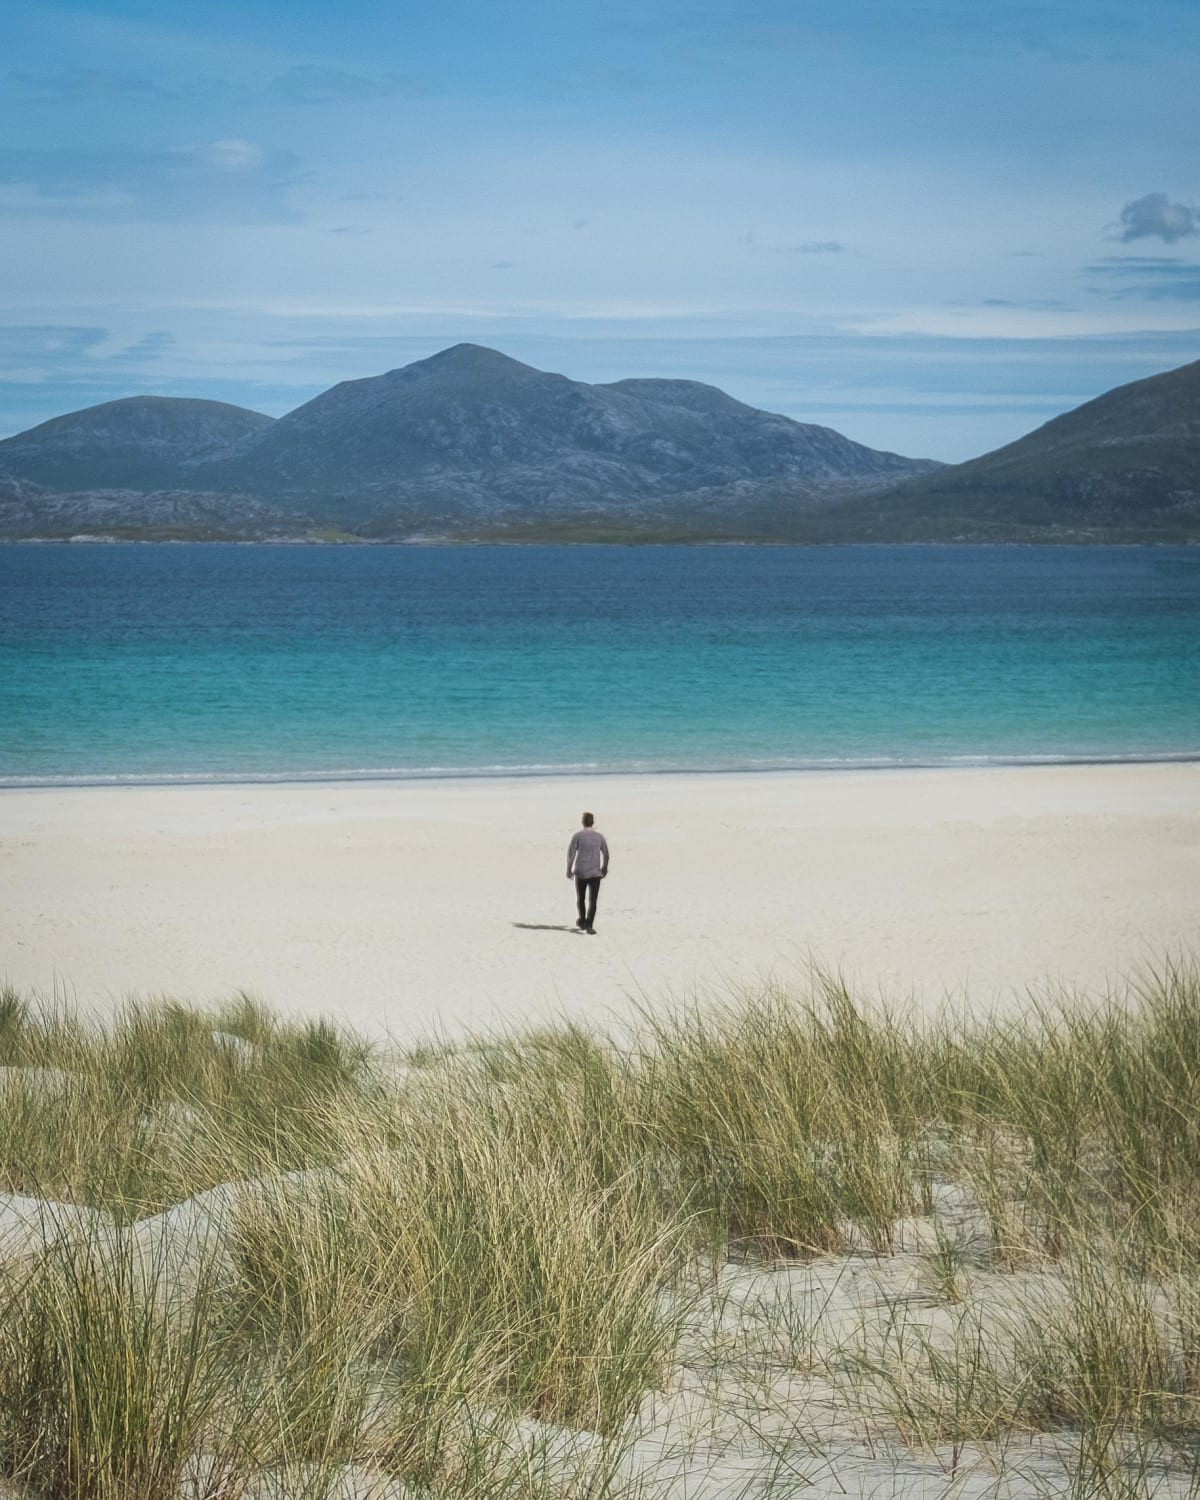 Luskentyre Beach, Isle of Harris, Scotland. Never did I expect to see such a tropical (but cold) scene in the North of Scotland